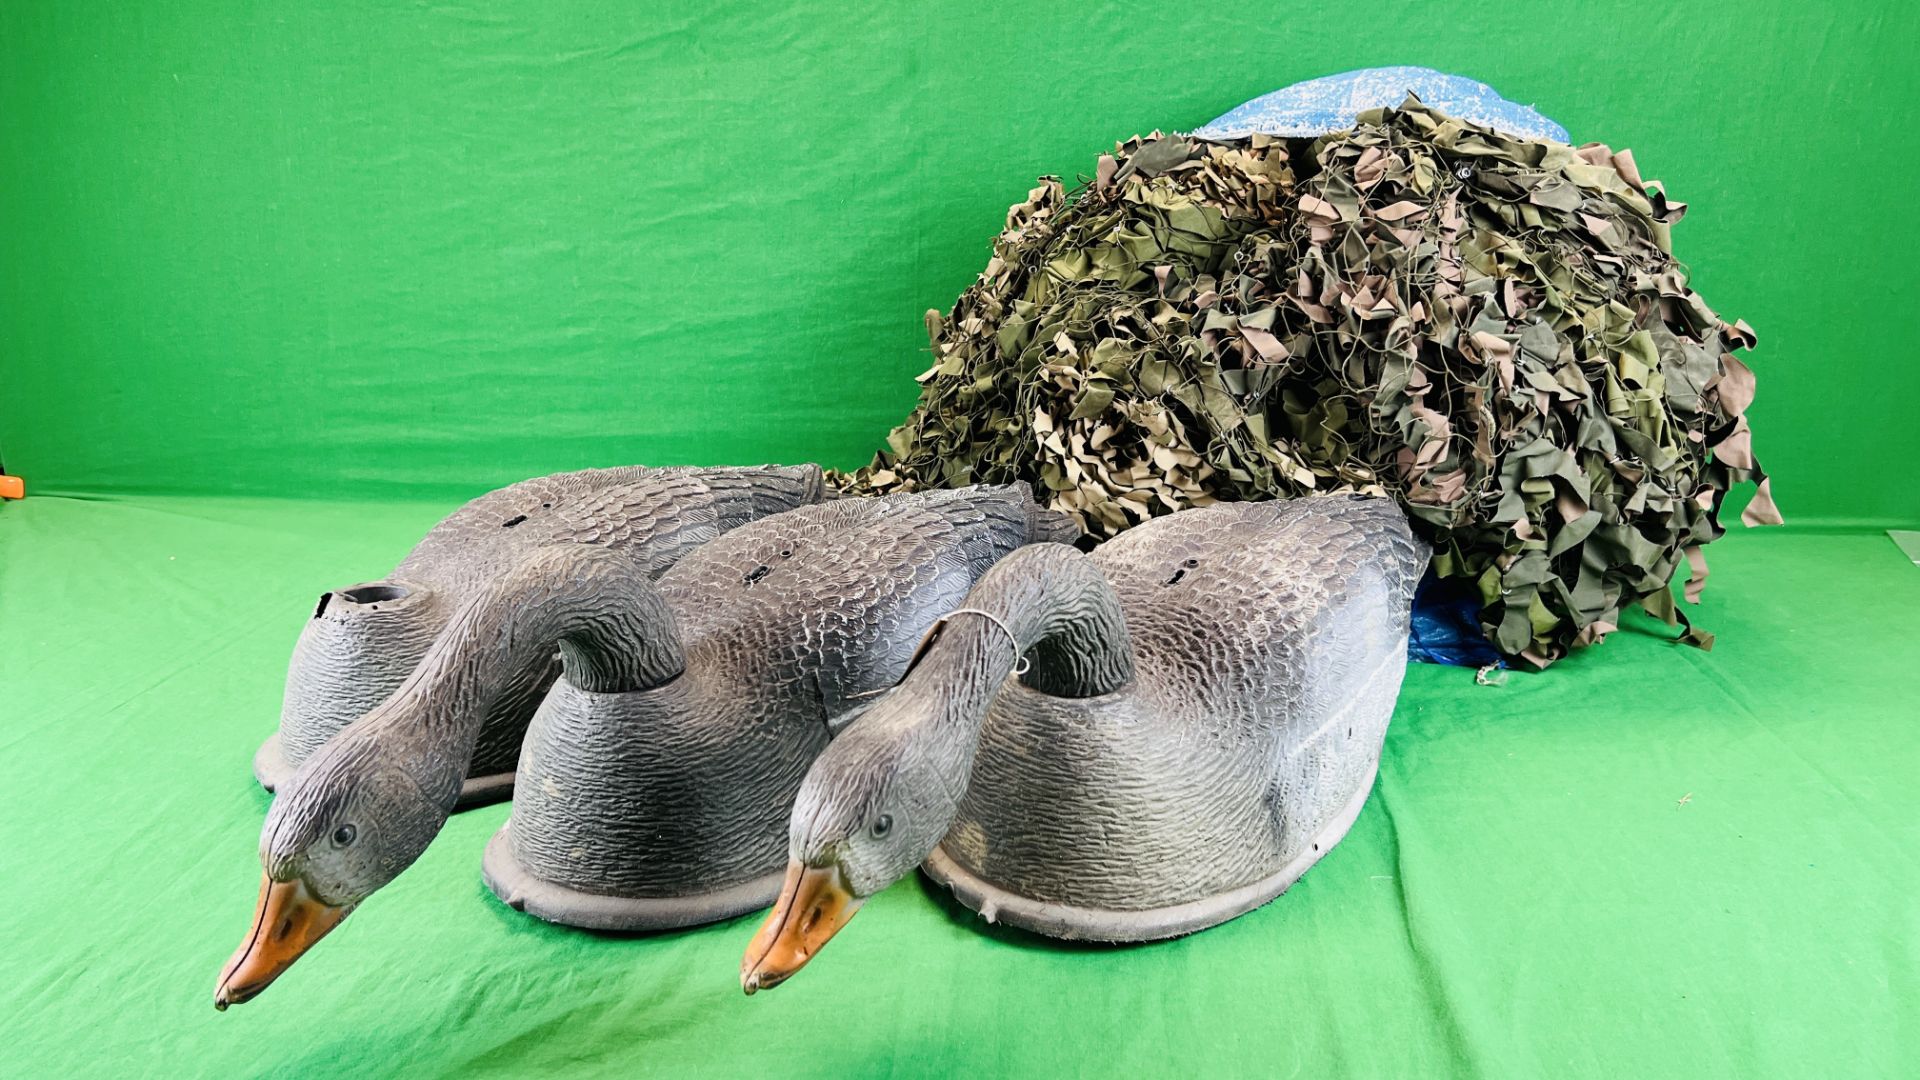 3 GEESE DECOY BODIES - 2 WITH HEADS AND CAMO NET